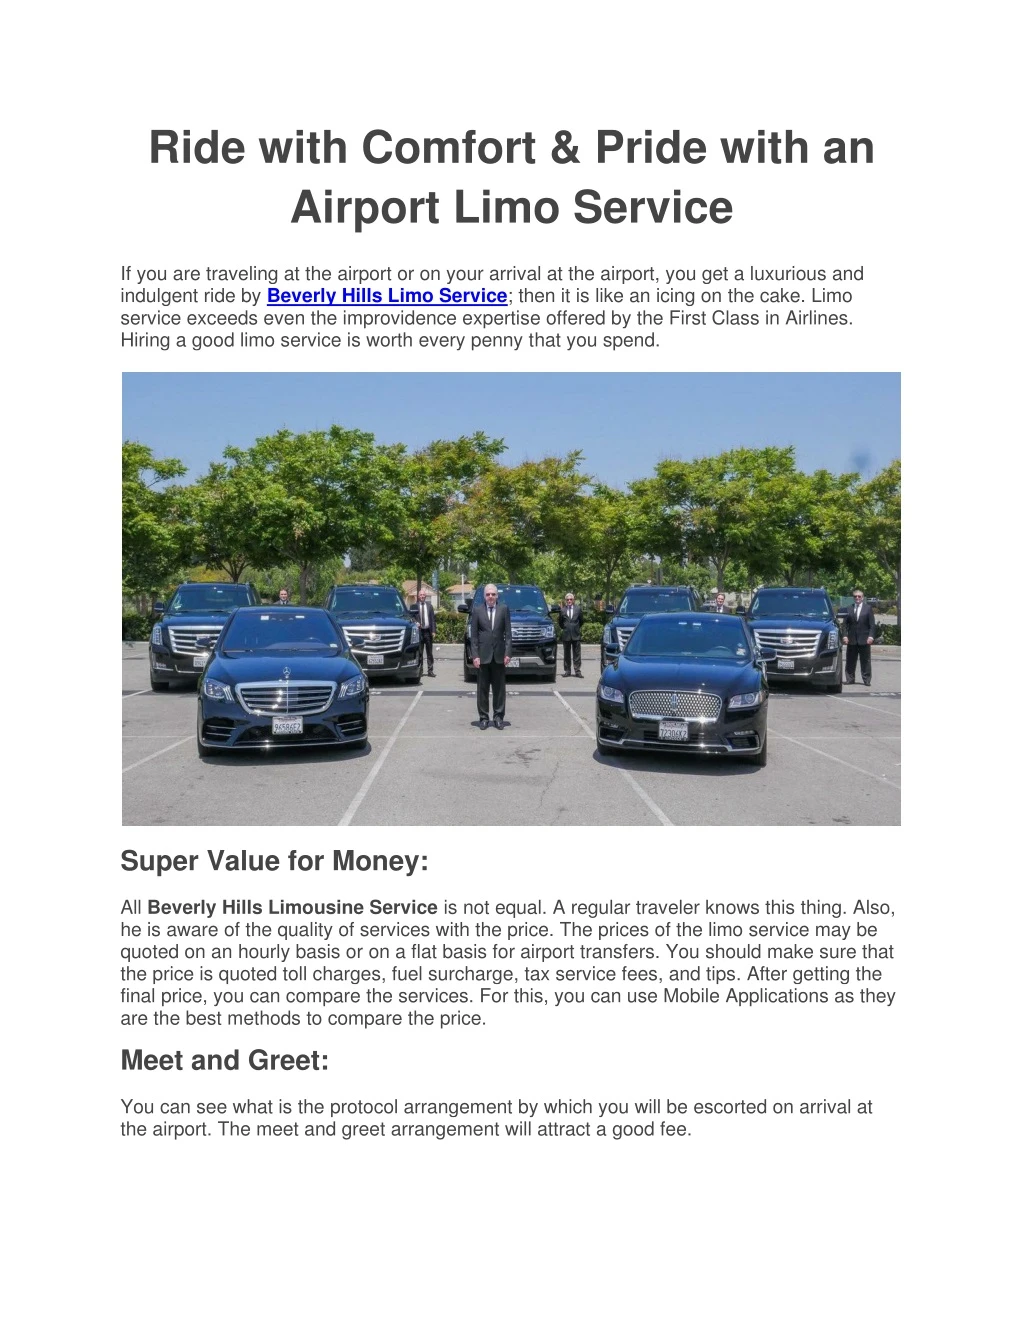 ride with comfort pride with an airport limo